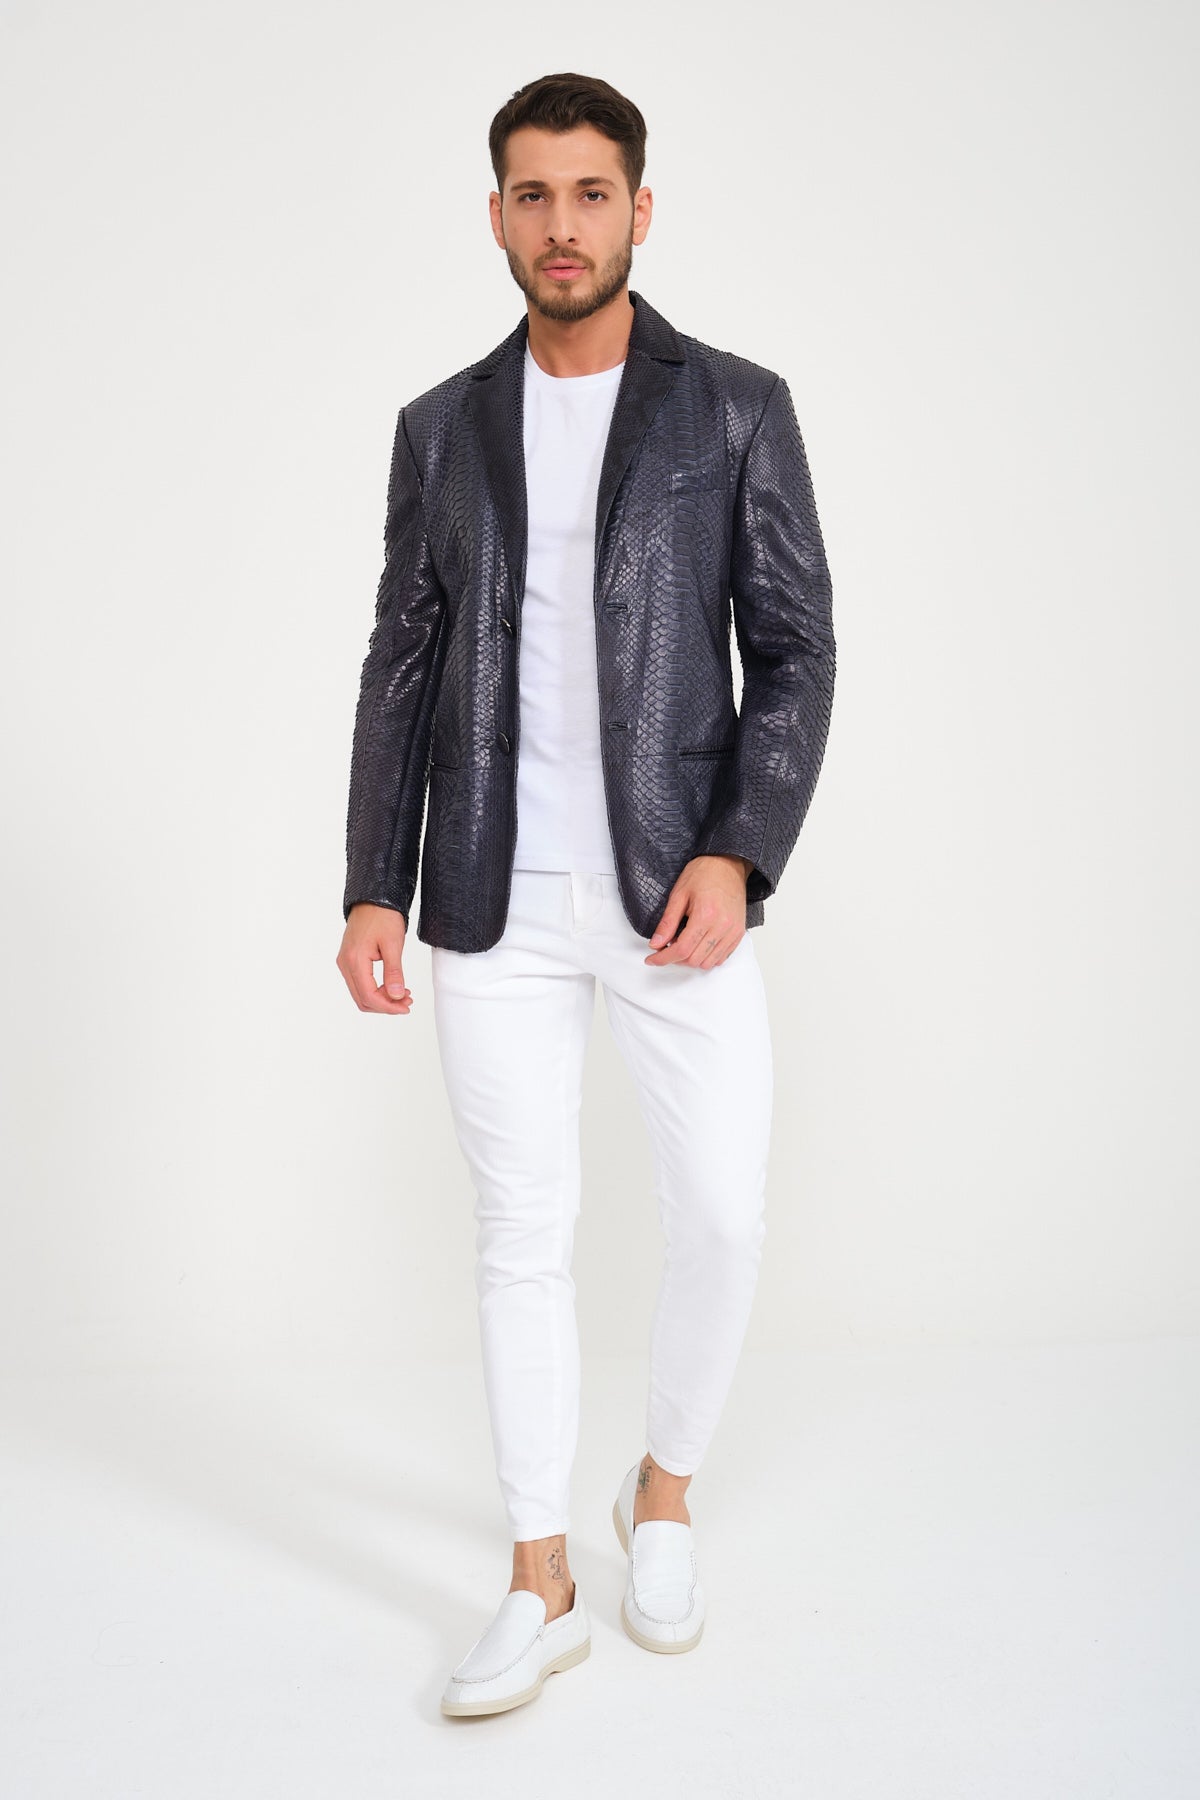 Midnight Blue Leather Mens Jacket: The Bravo — J.L. Rocha Collections